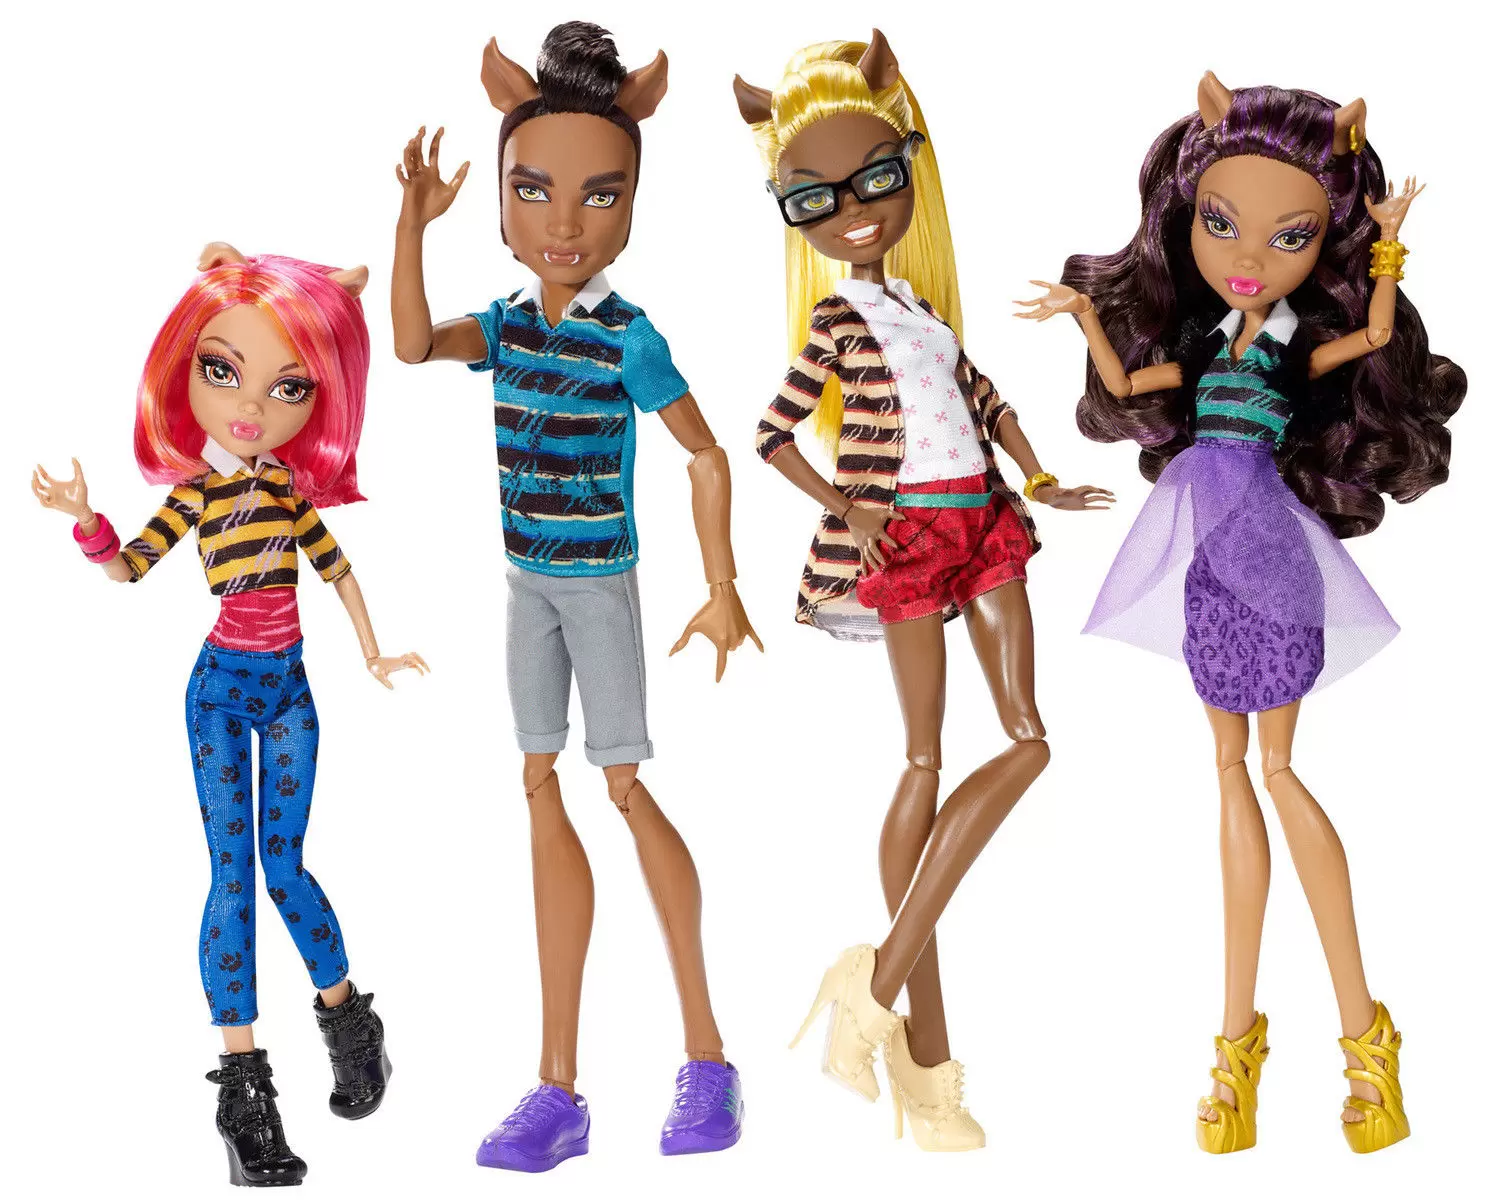 Monster High Dolls - Clawdeen, Howleen, Clawd & Clawdia - A Pack of Trouble